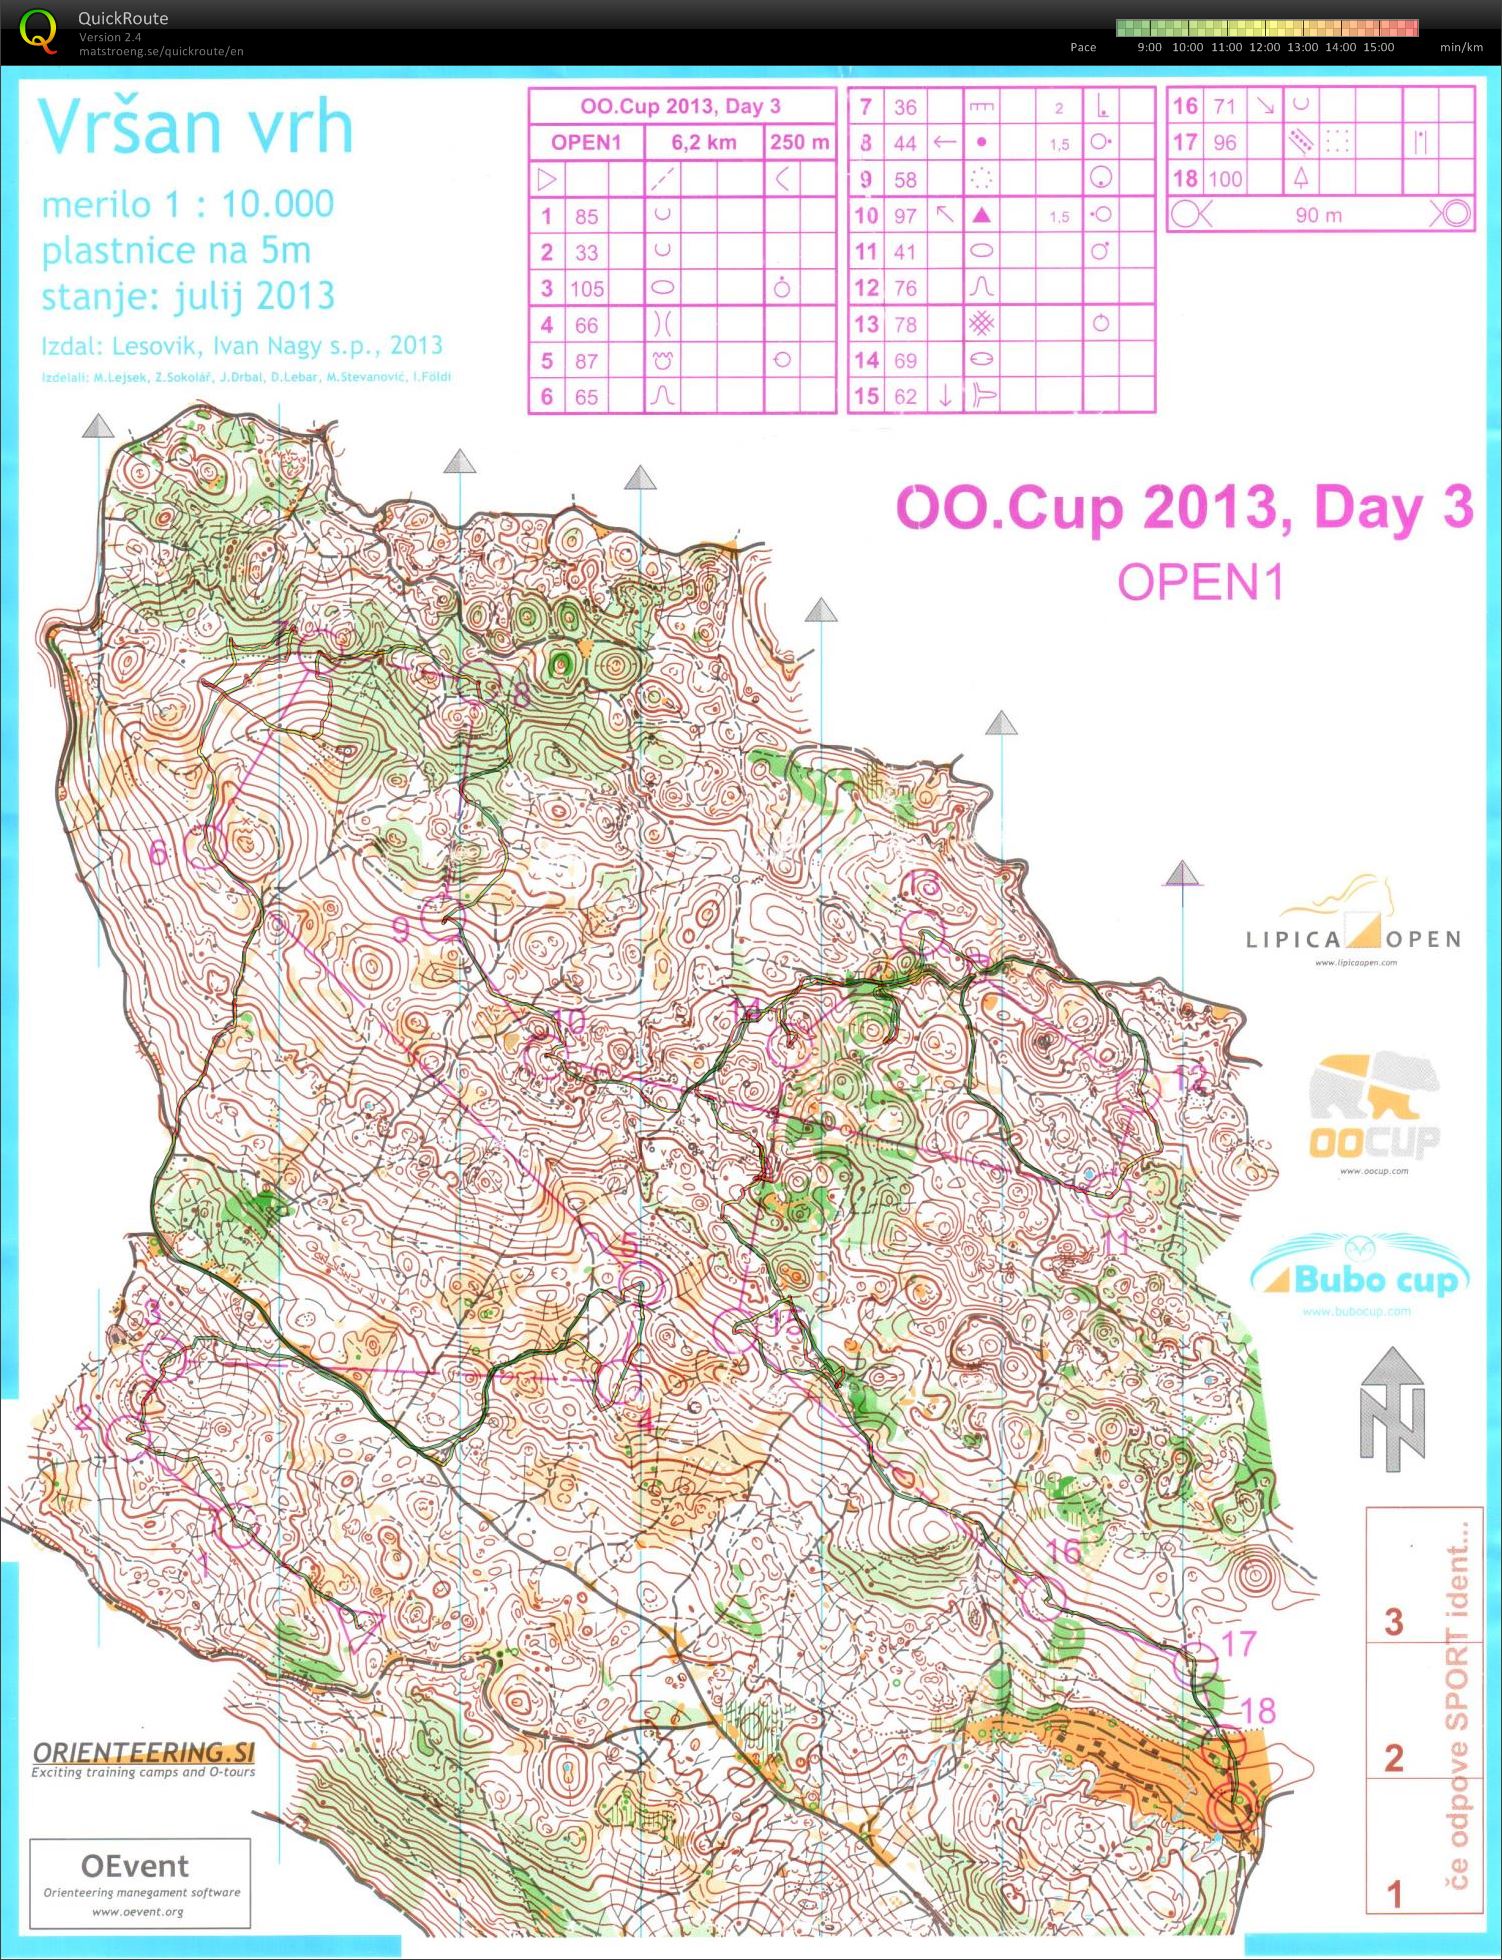 OOCup stage 3. (2013-07-28)